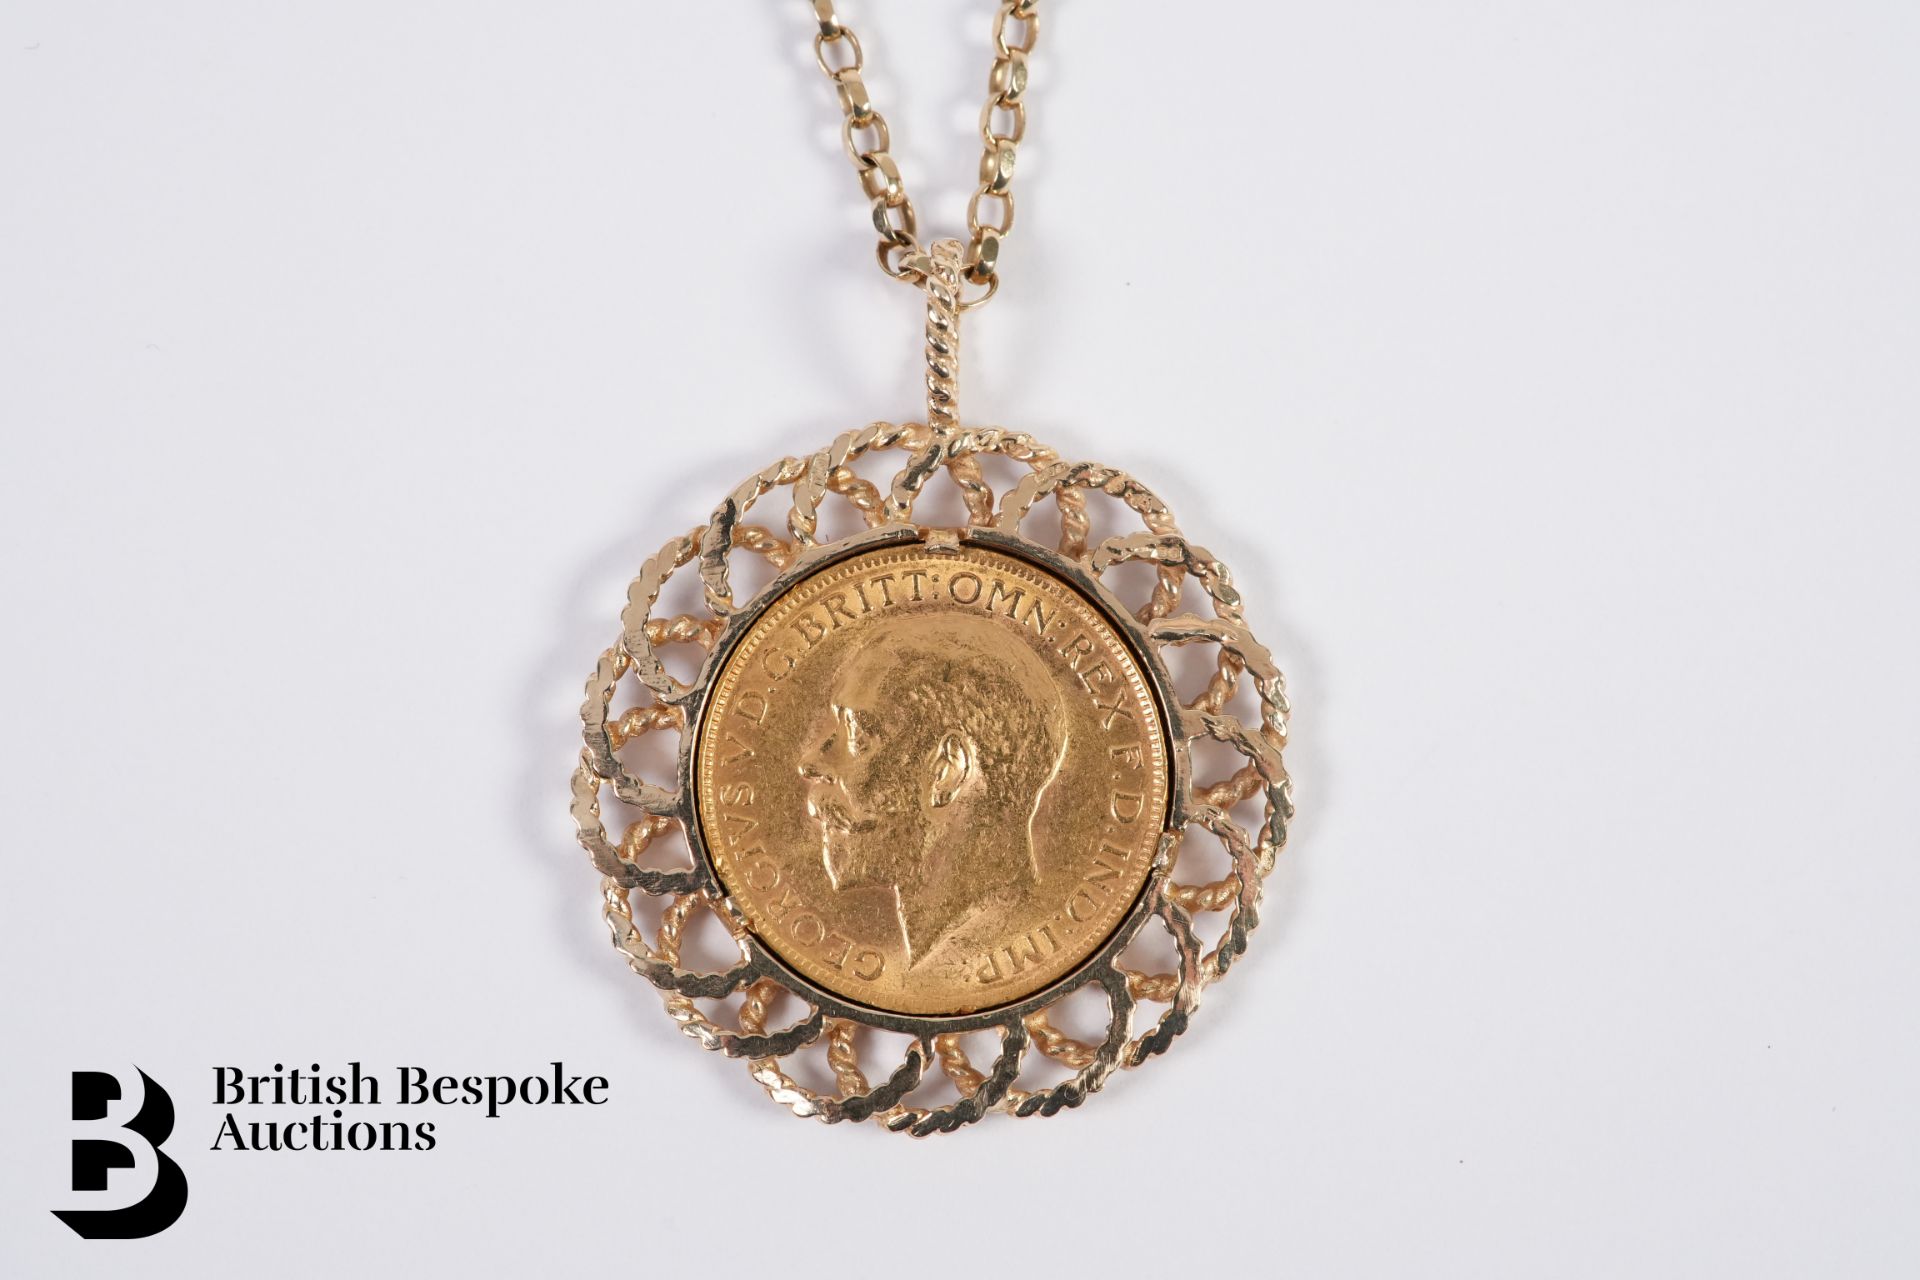 Gold Sovereign Pendant on Chain - Image 3 of 3